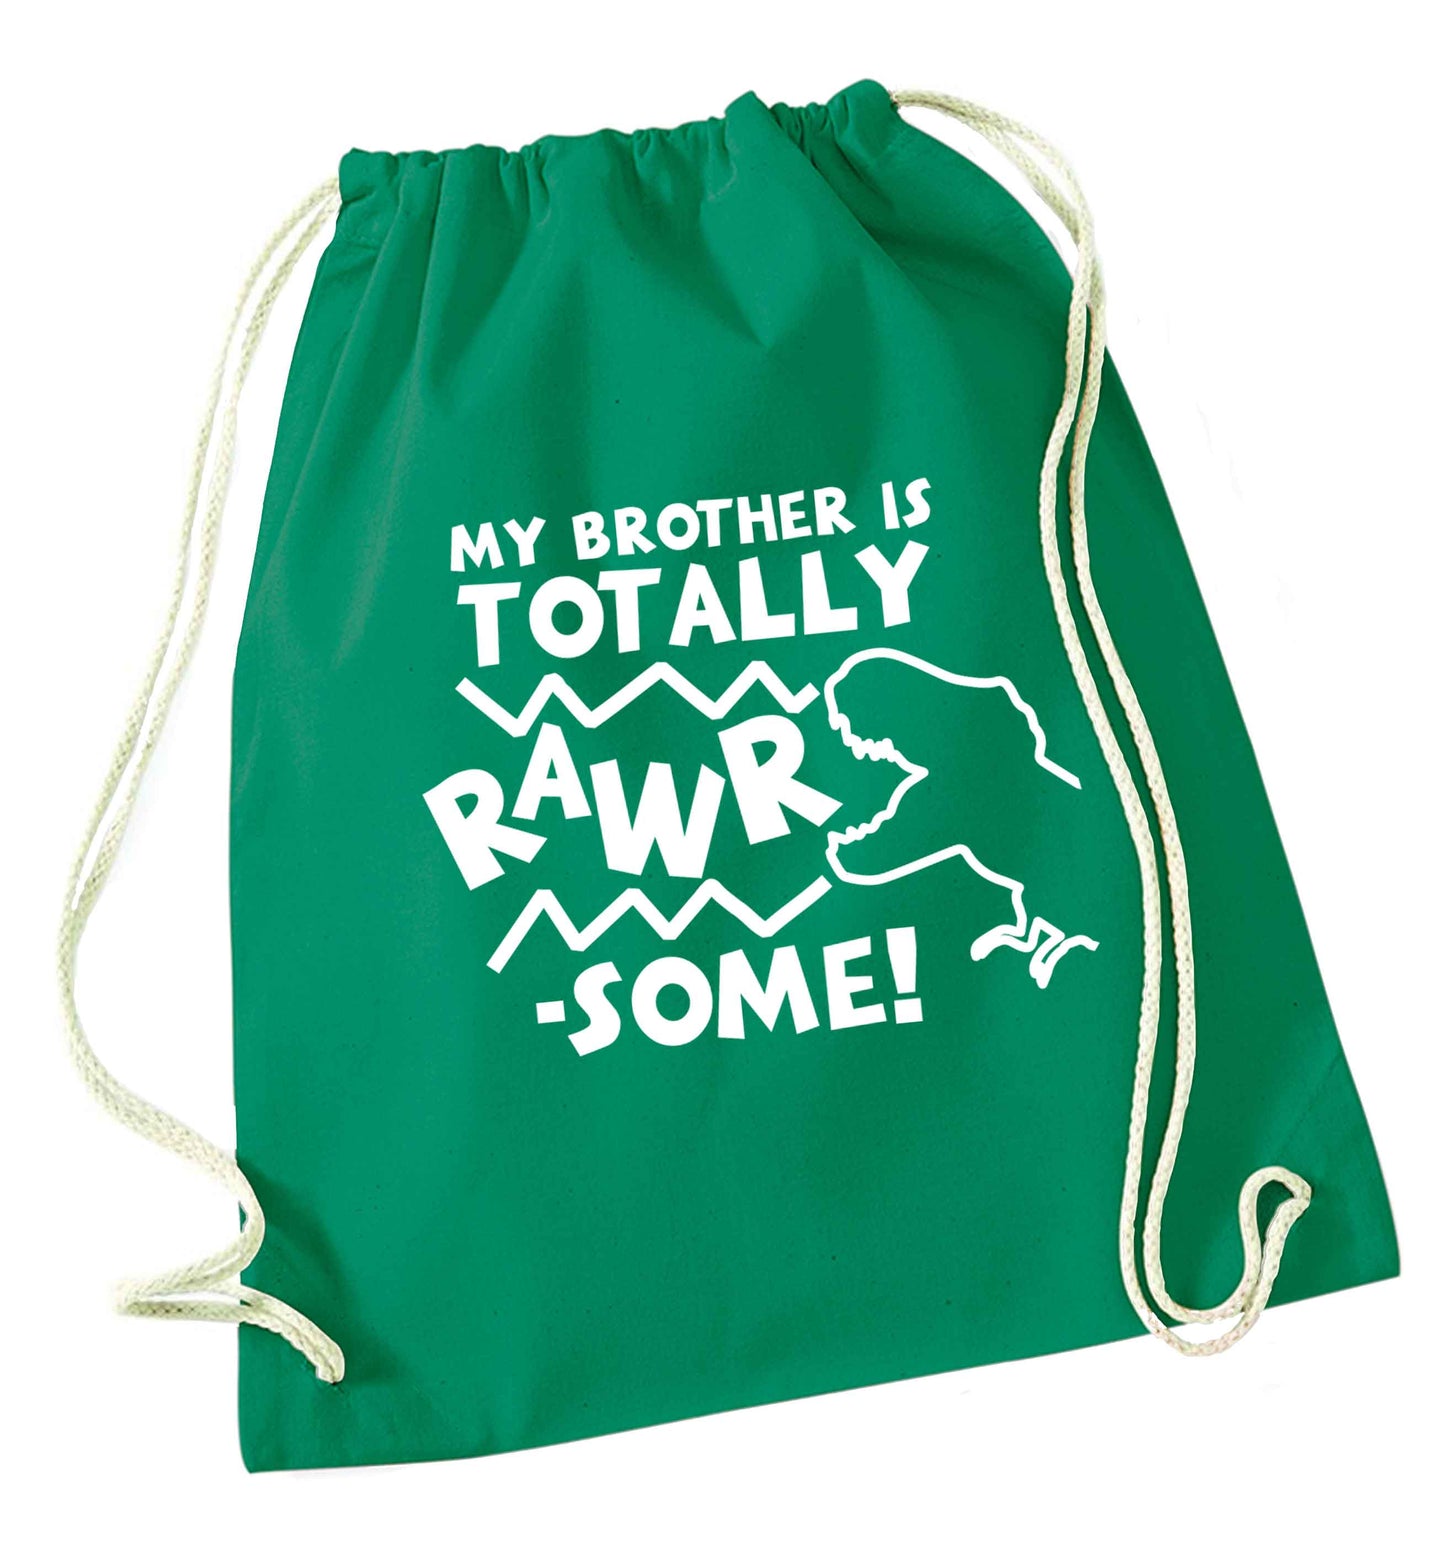 My brother is totally rawrsome green drawstring bag